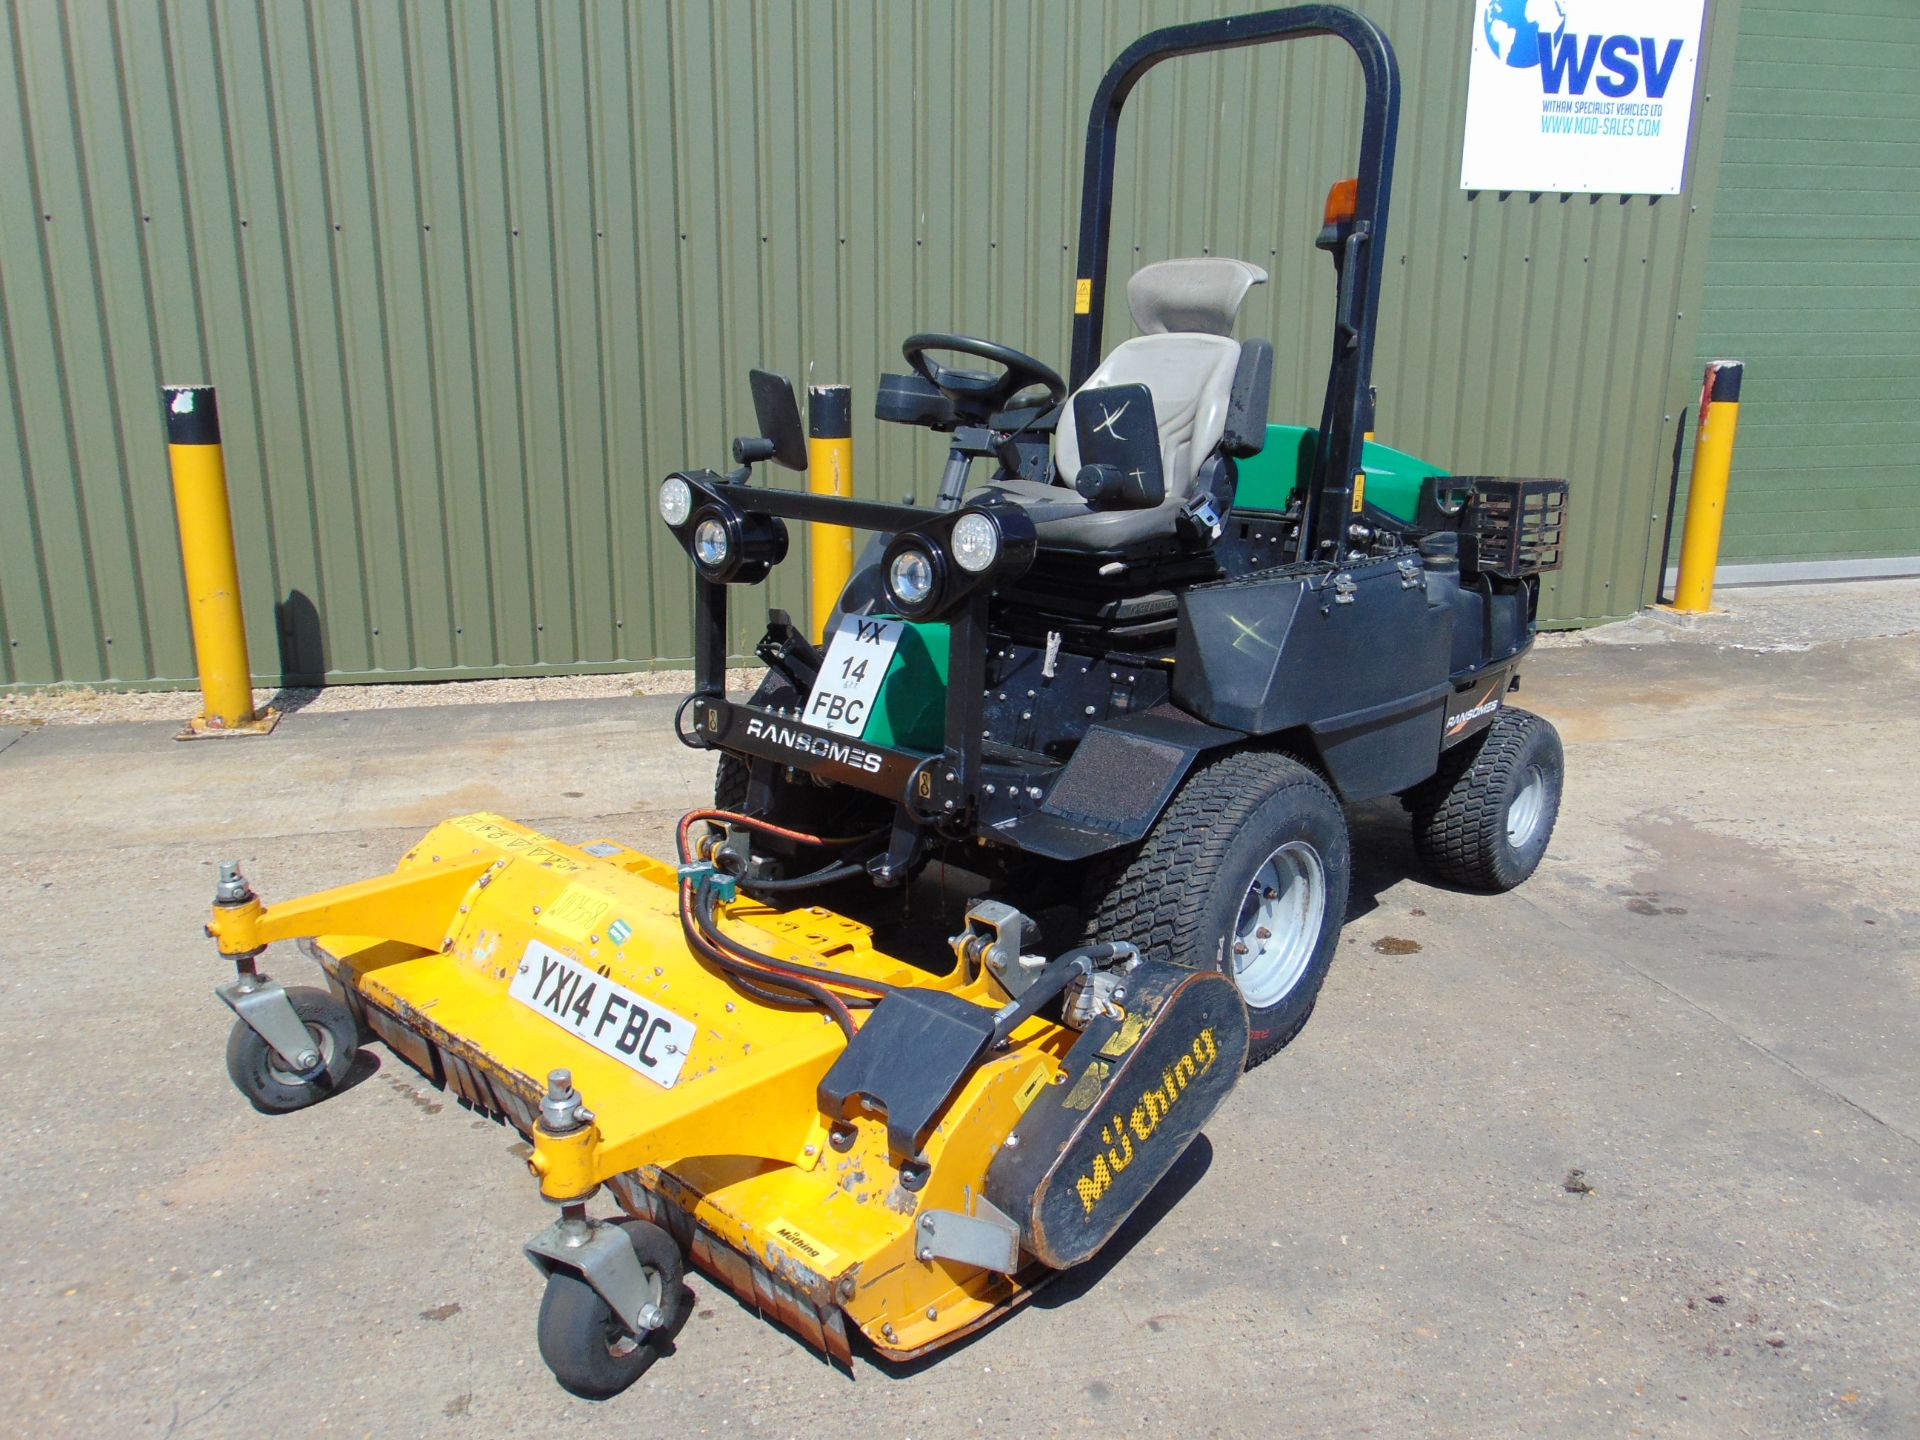 2014 Ransomes 4WD HR300 C/W Muthing Outfront Flail Mower ONLY 2,302 HOURS! - Image 2 of 29